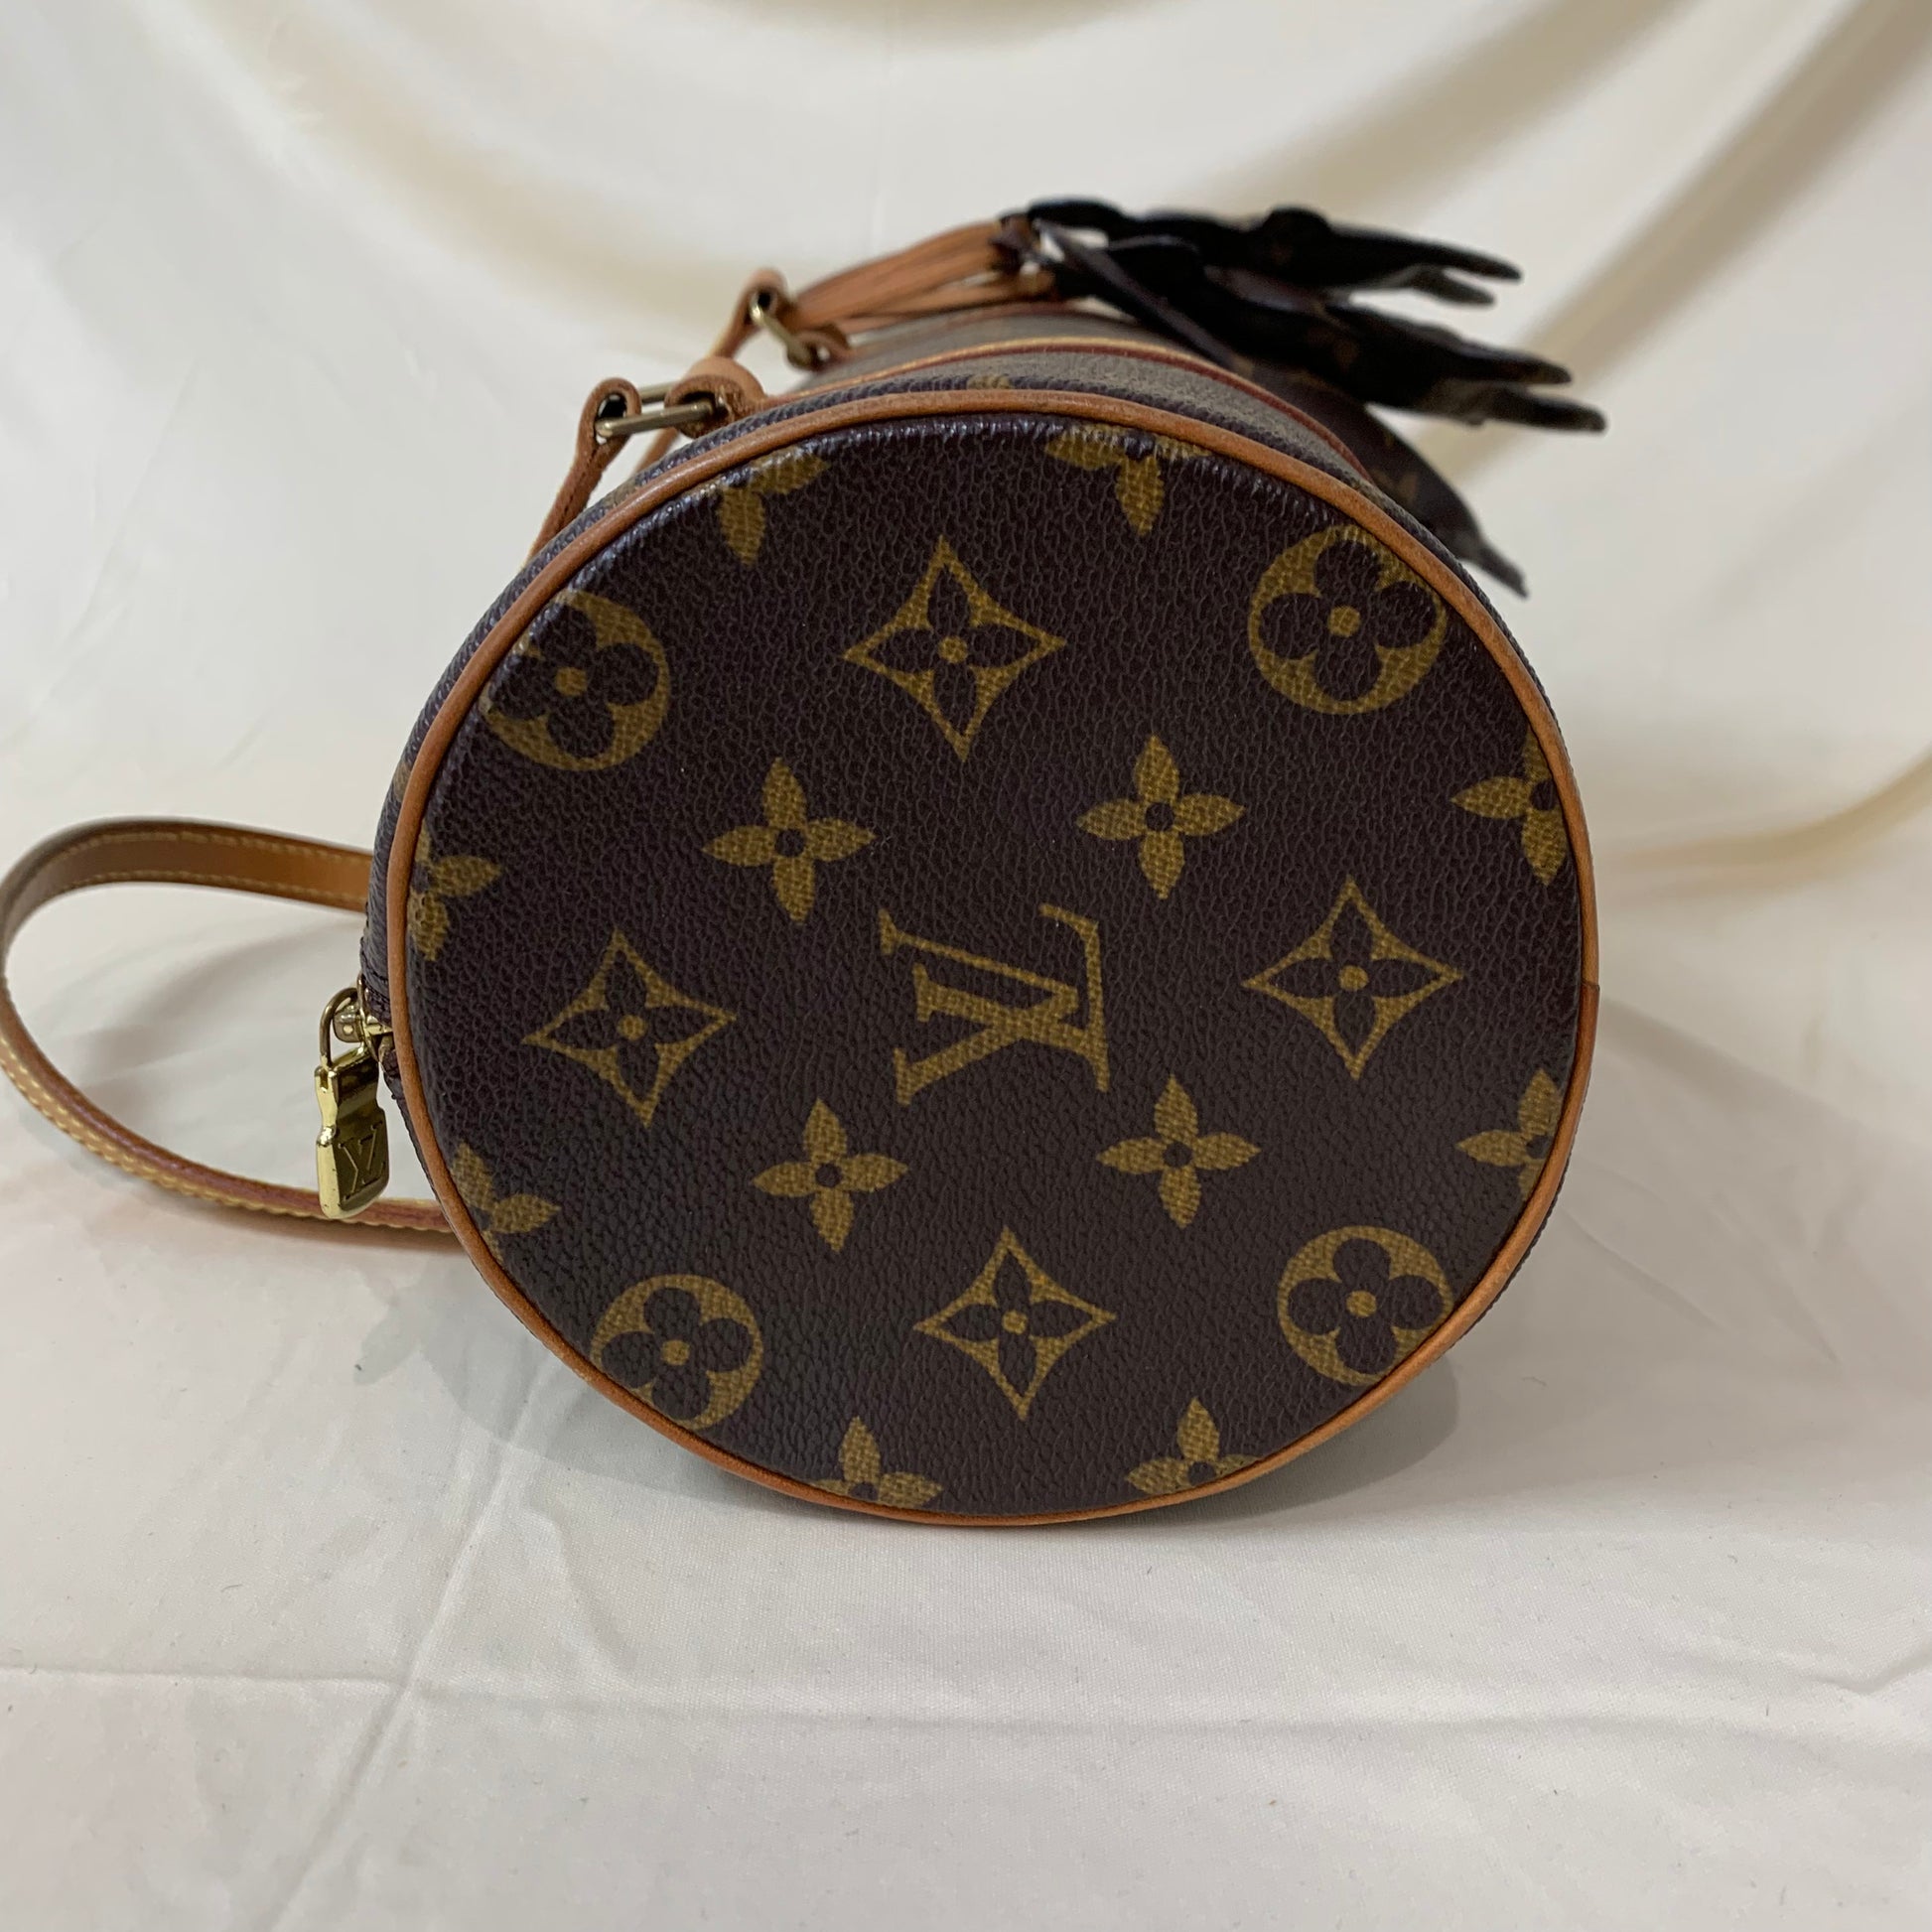 LUXCELLENT - Shop & Sell - Authenticated Used Designer Handbags